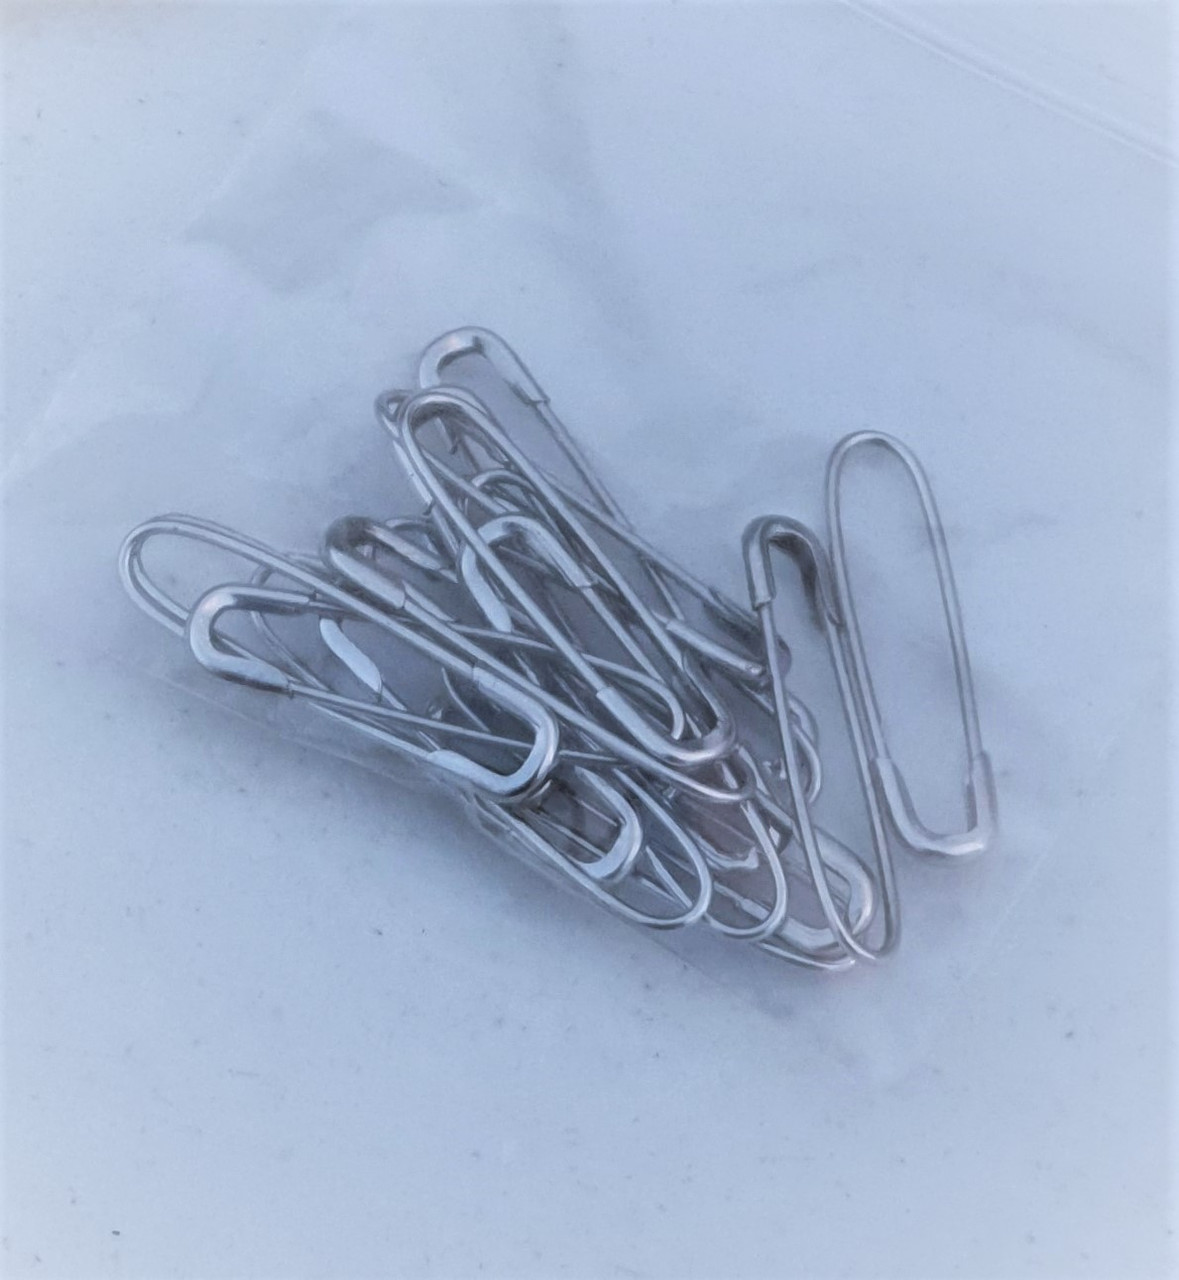 Snag Free Safety Pins Pack $ 1.50 - The Islamic Place